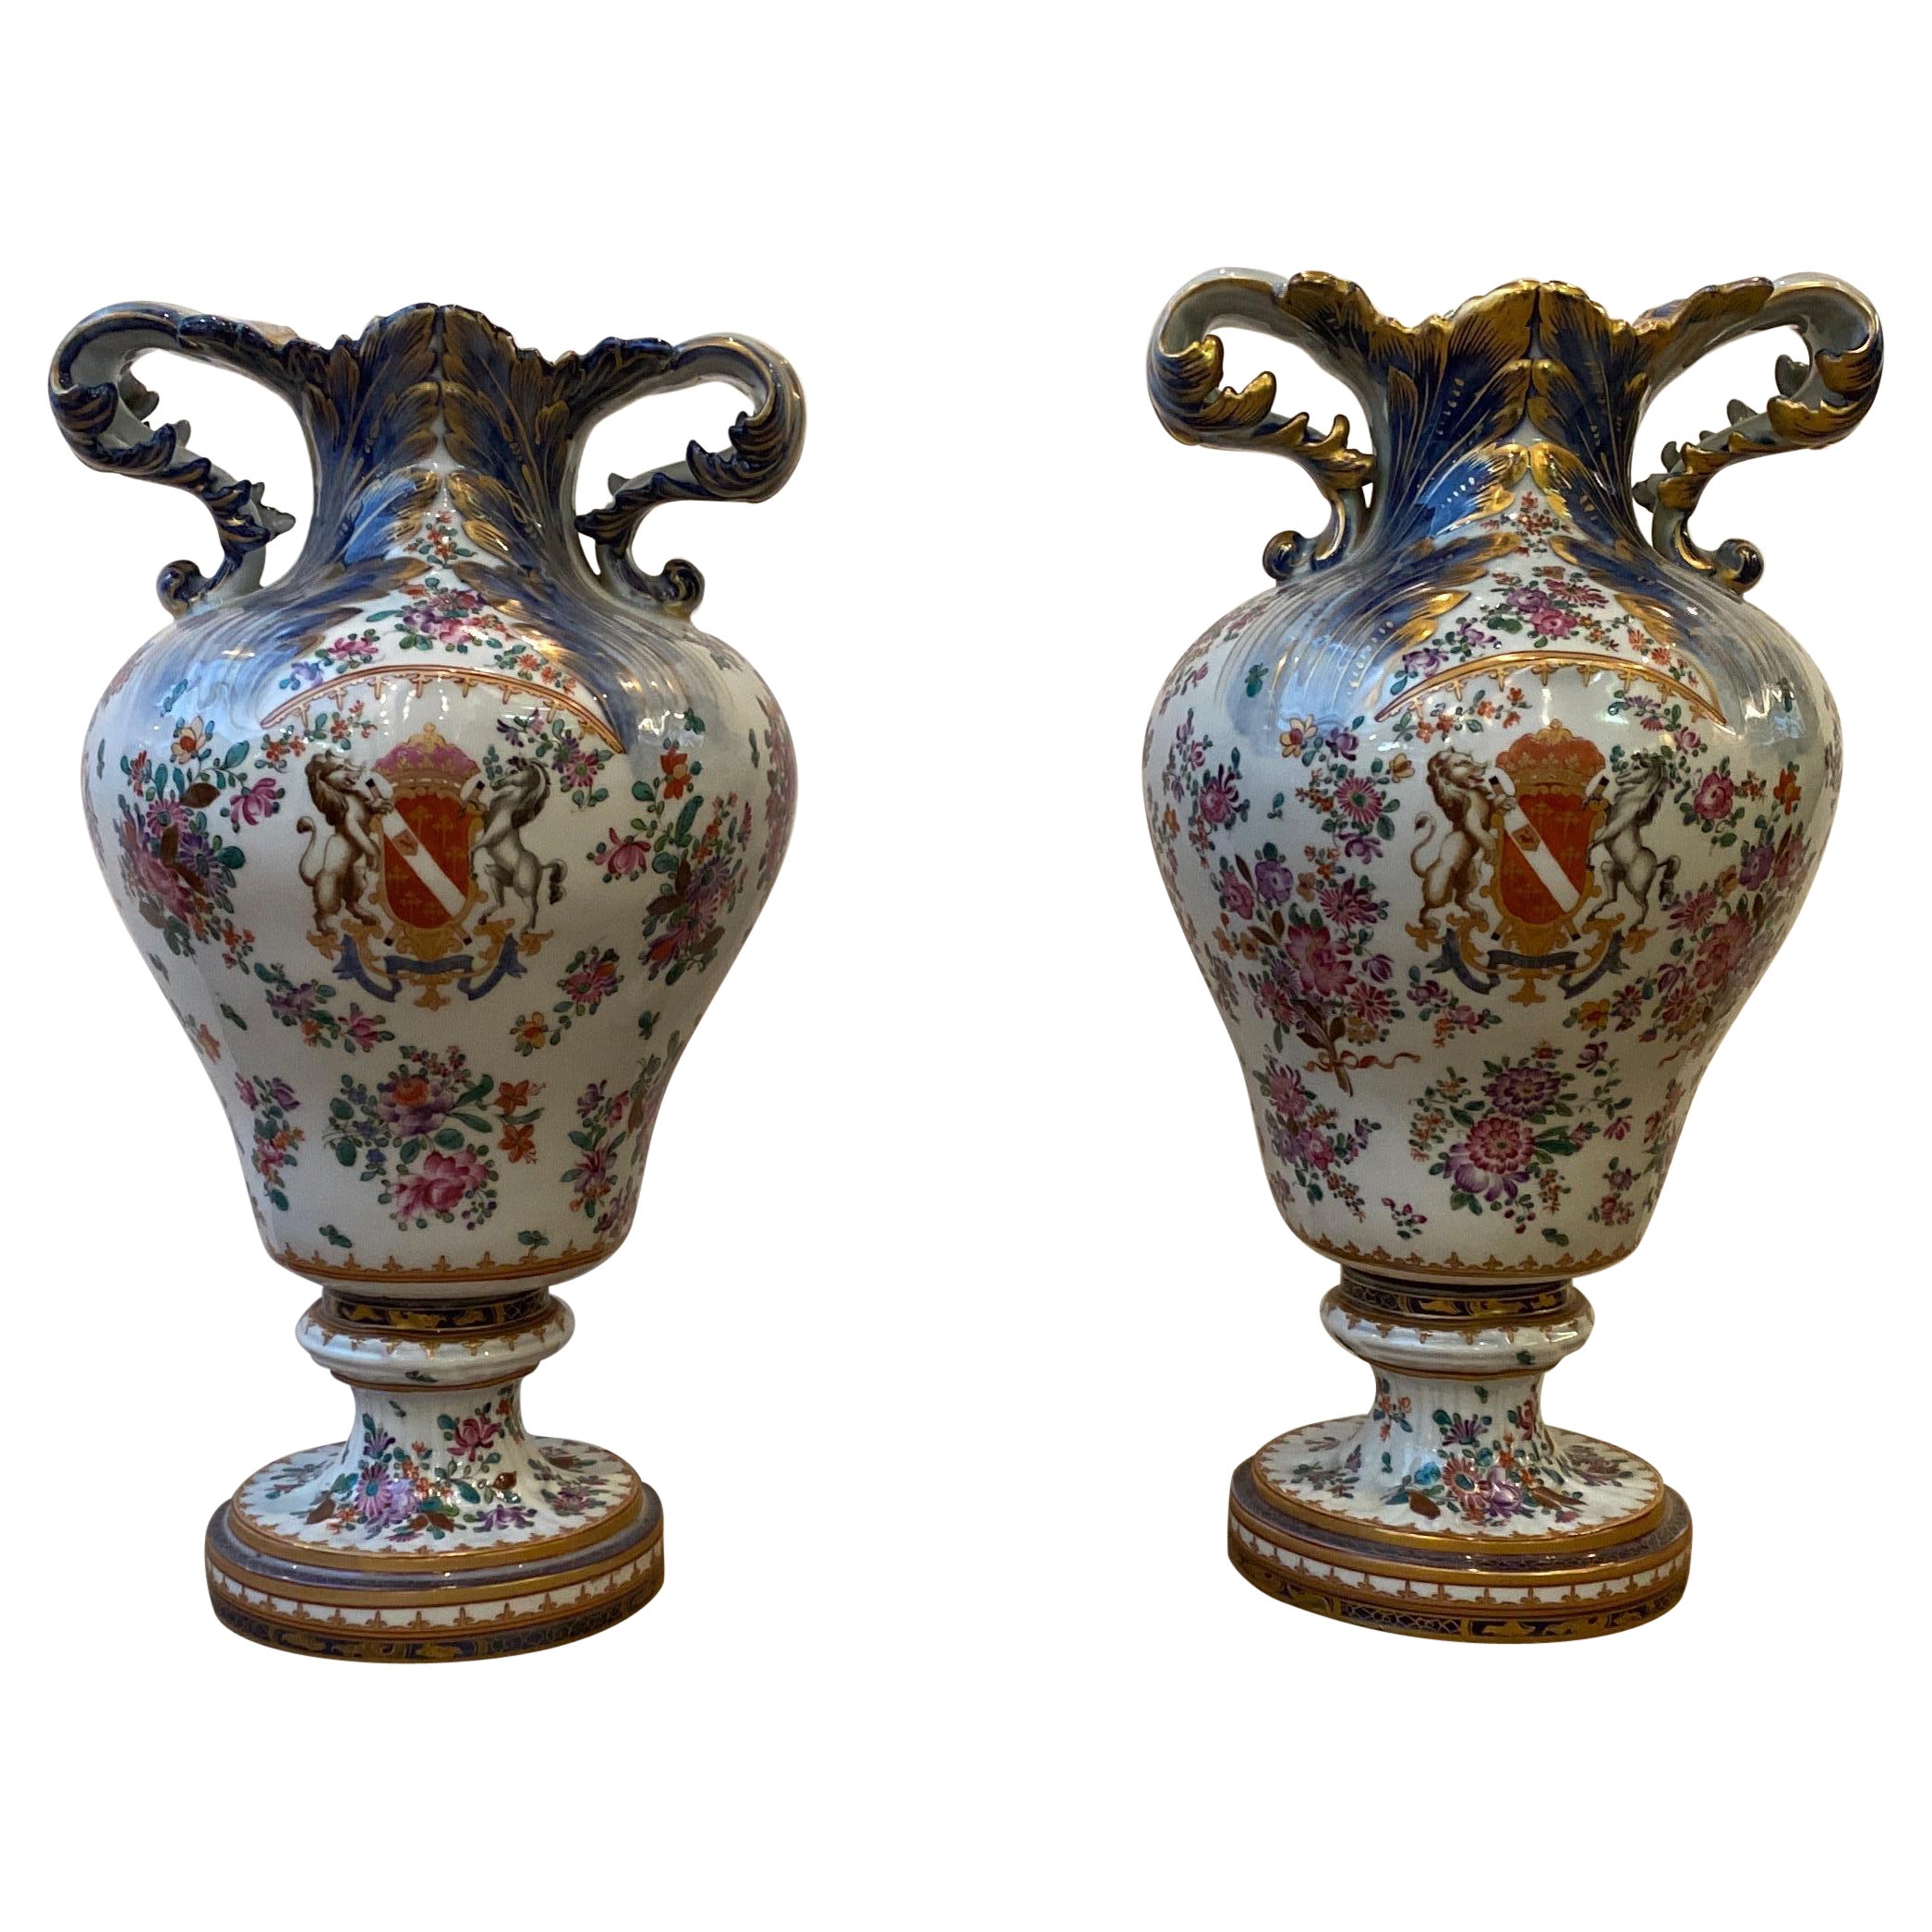 Pair of Porcelain Armorial Urns by Naples Capodimonte 19th Century